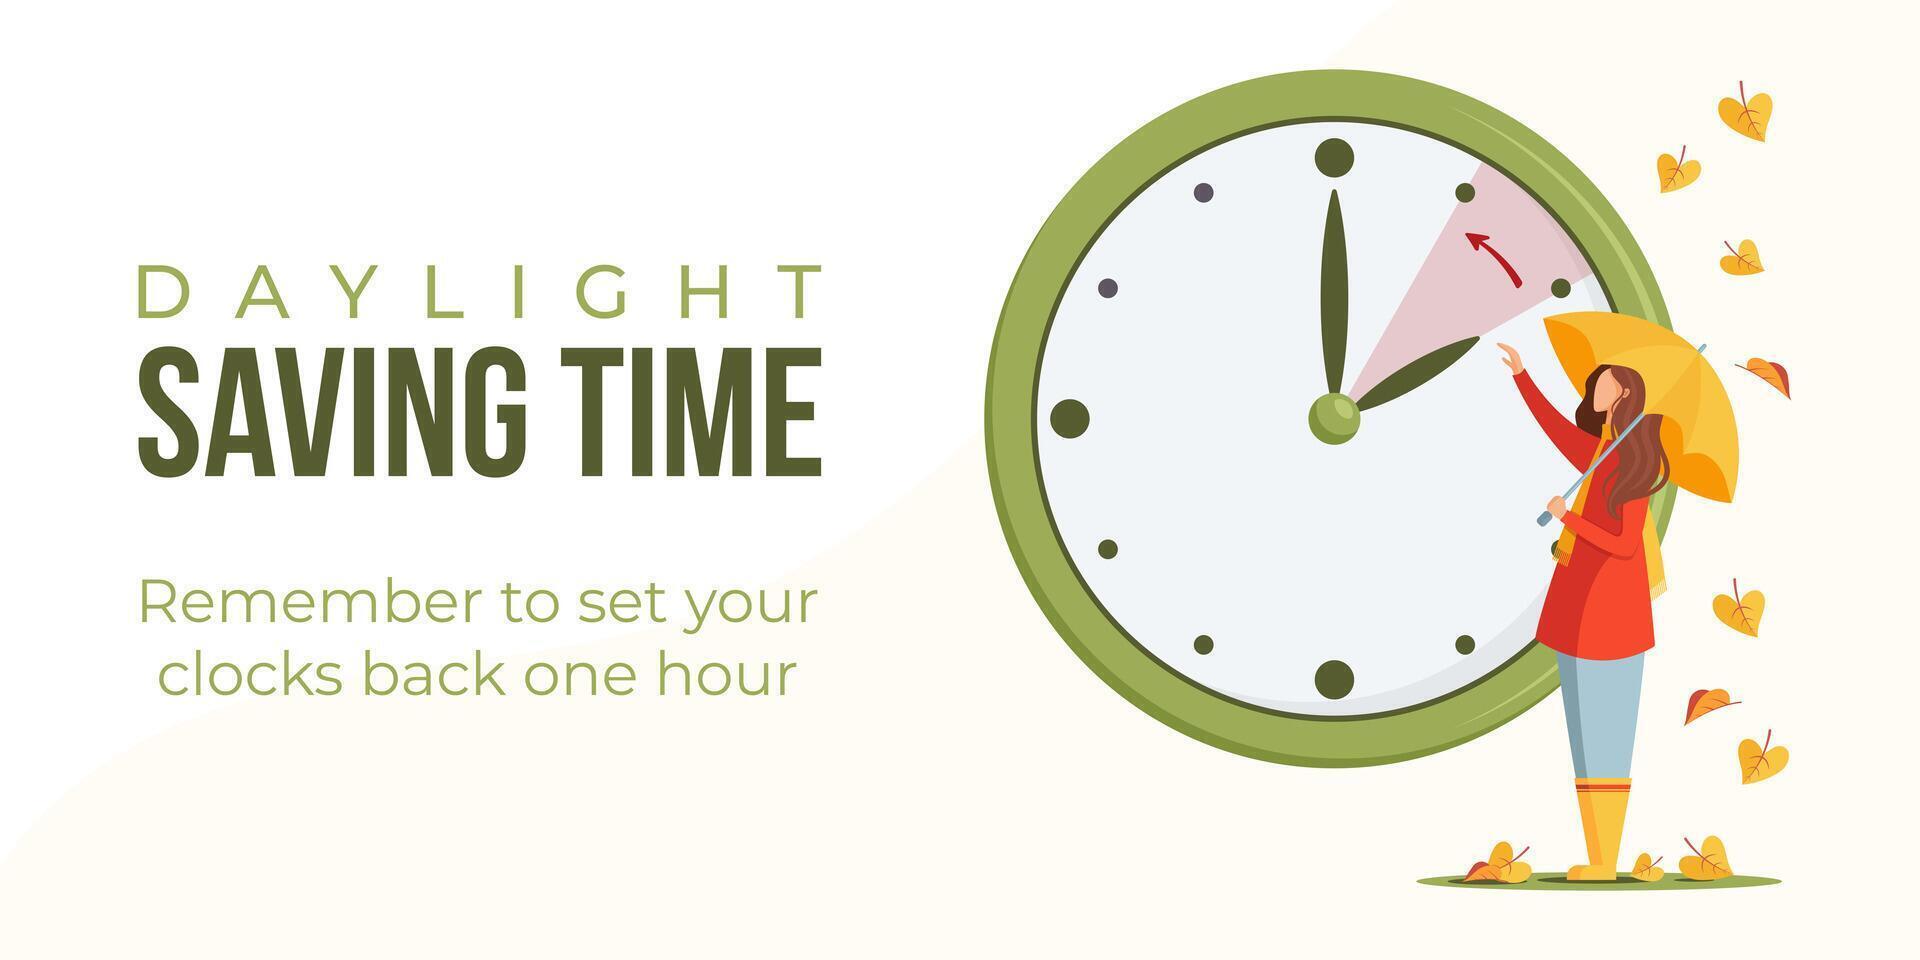 Daylight saving time ends web banner, turning clock back one hour reminder. Fall back to wintertime. Vector illustration of woman turning clock hand back an hour.